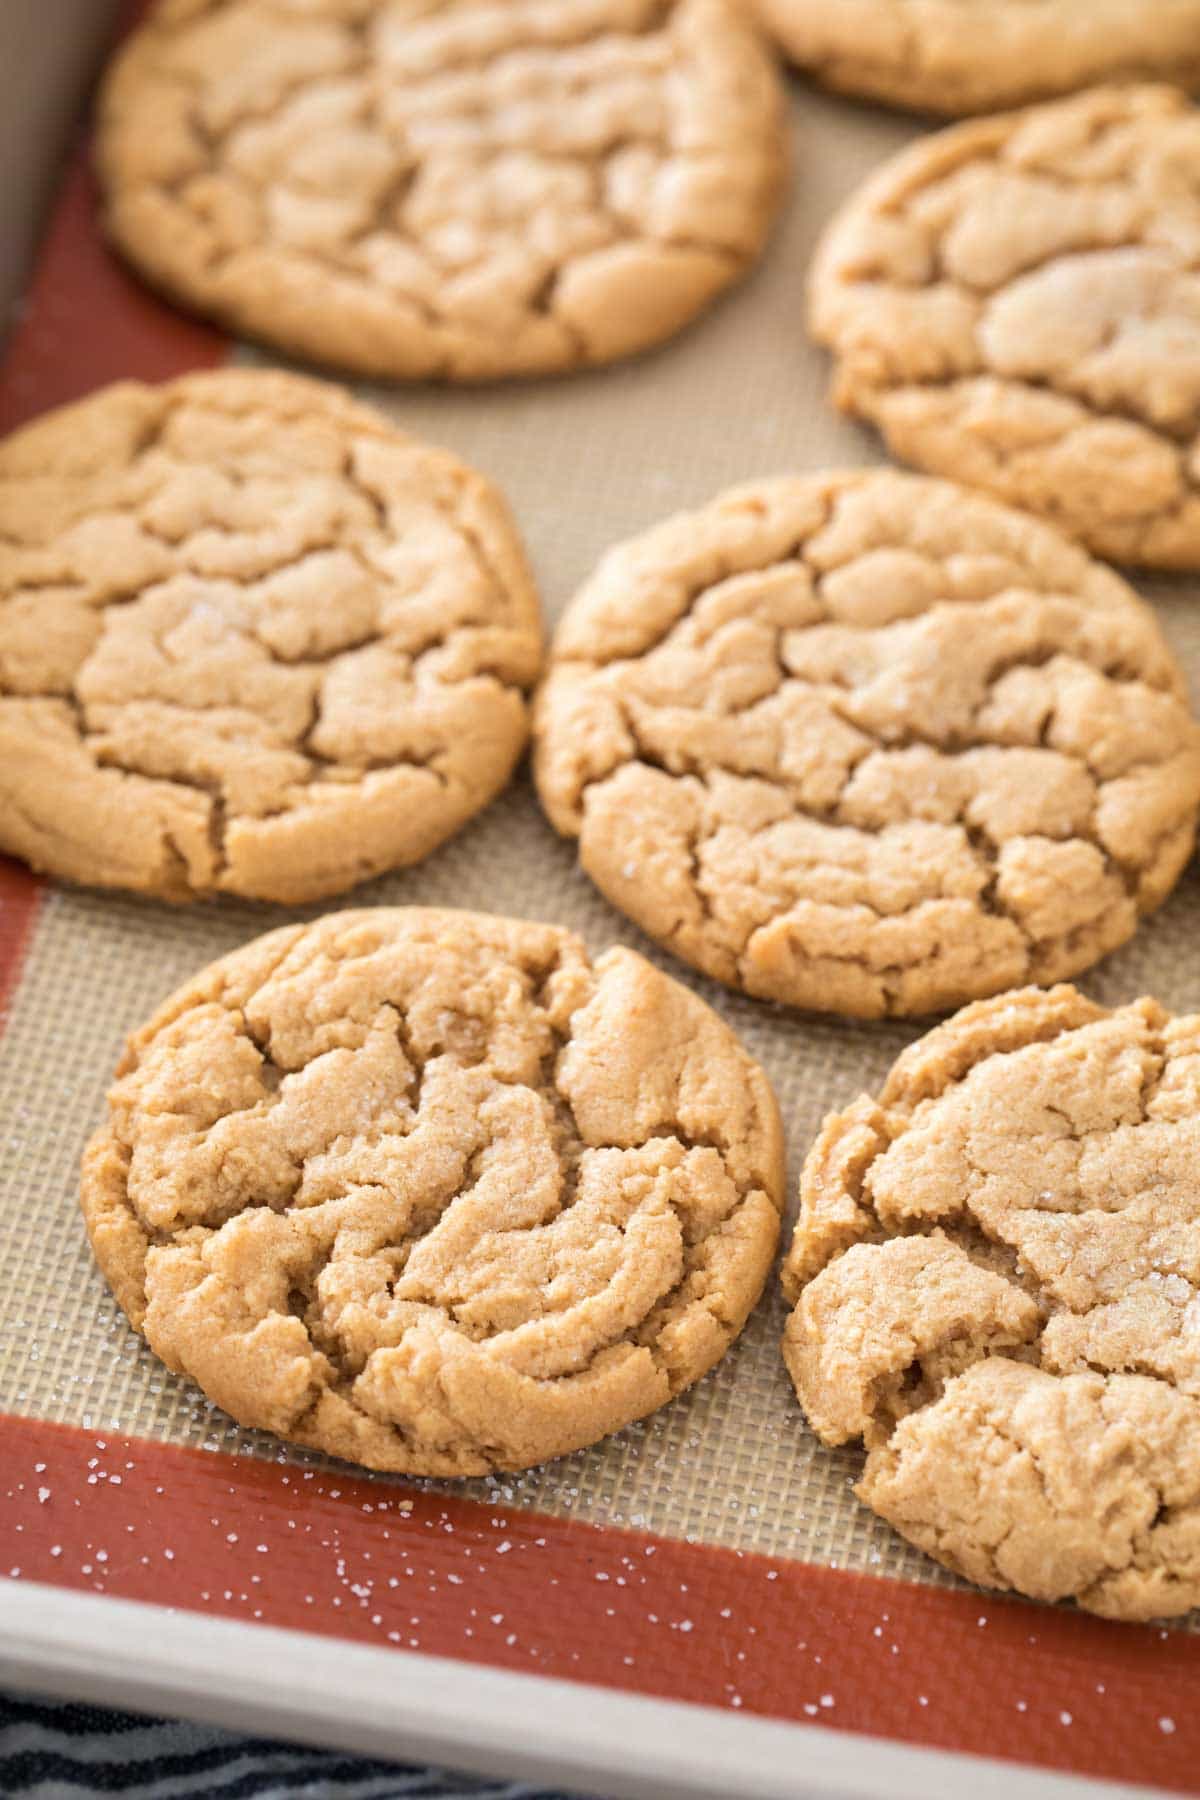 Love Cookies? You'll Enjoy These 10 Yummy Cookie Recipes From Sugar Spun Run